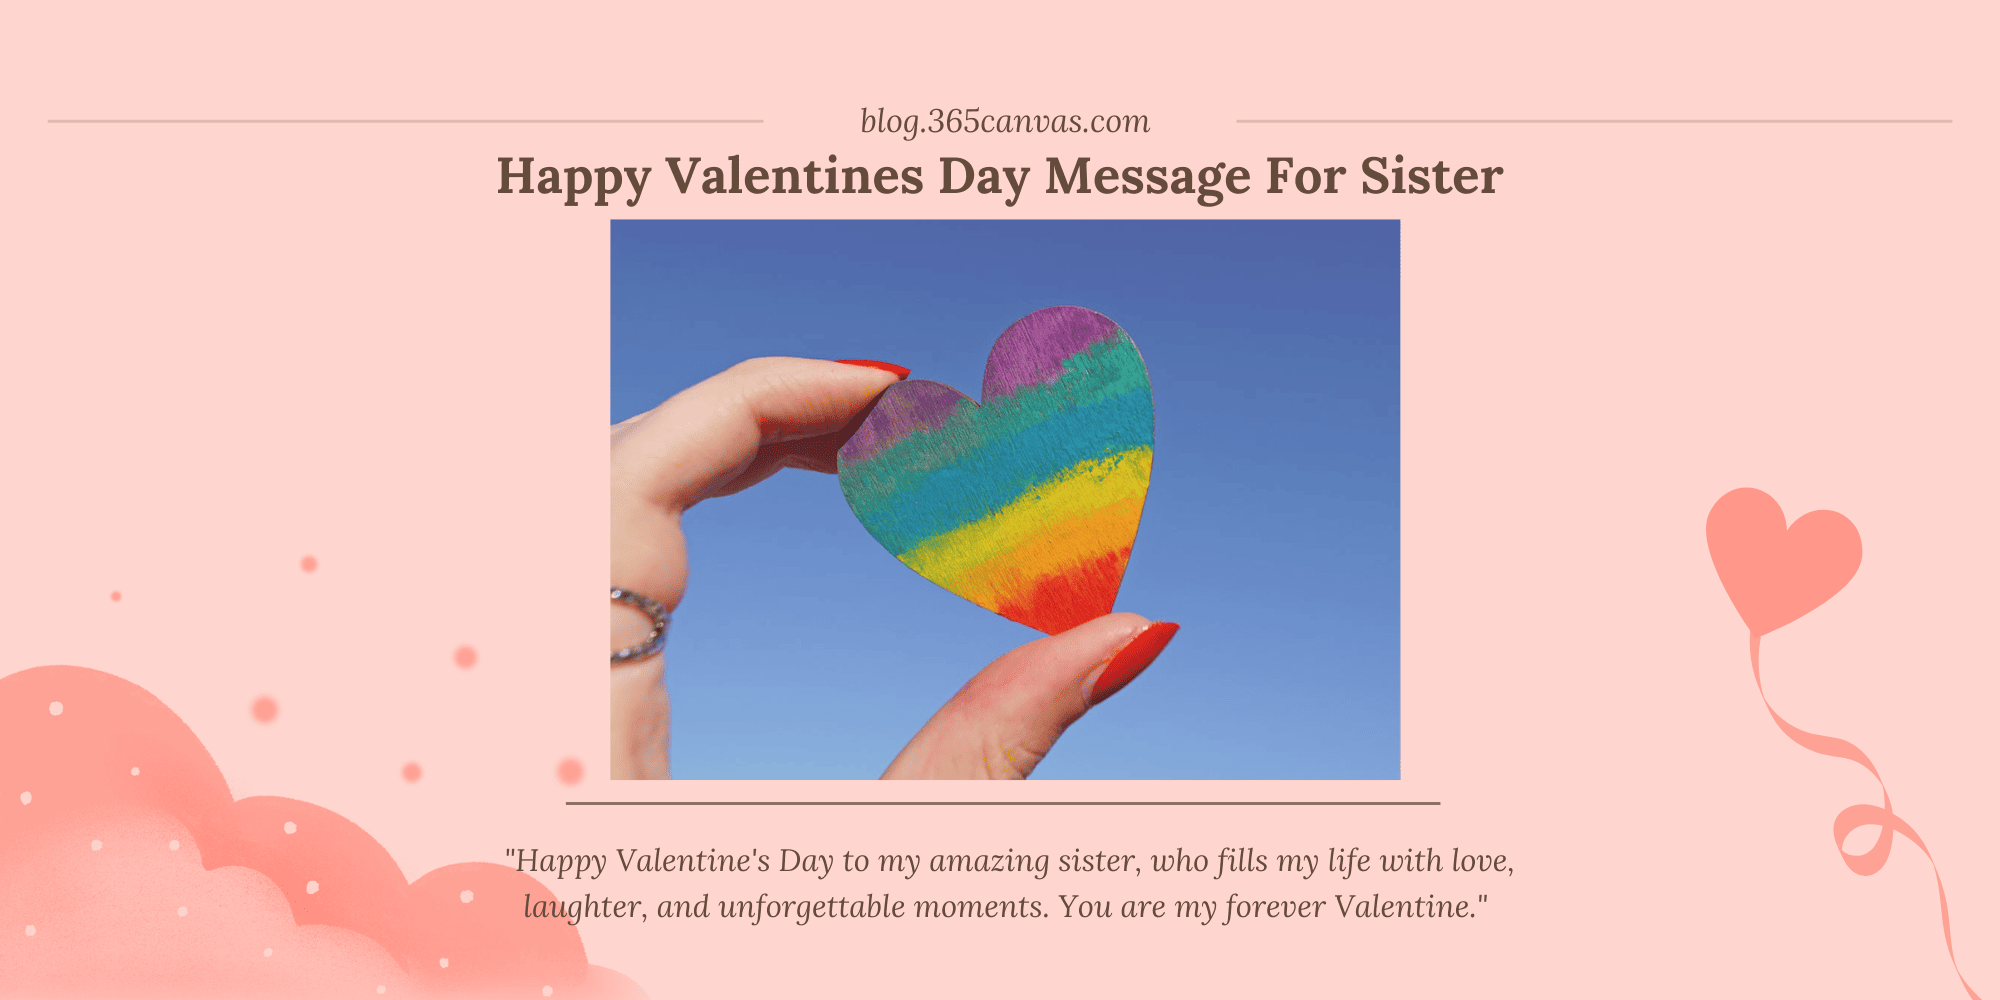 60 Sweet & Caring Valentine’s Day Messages for Sister